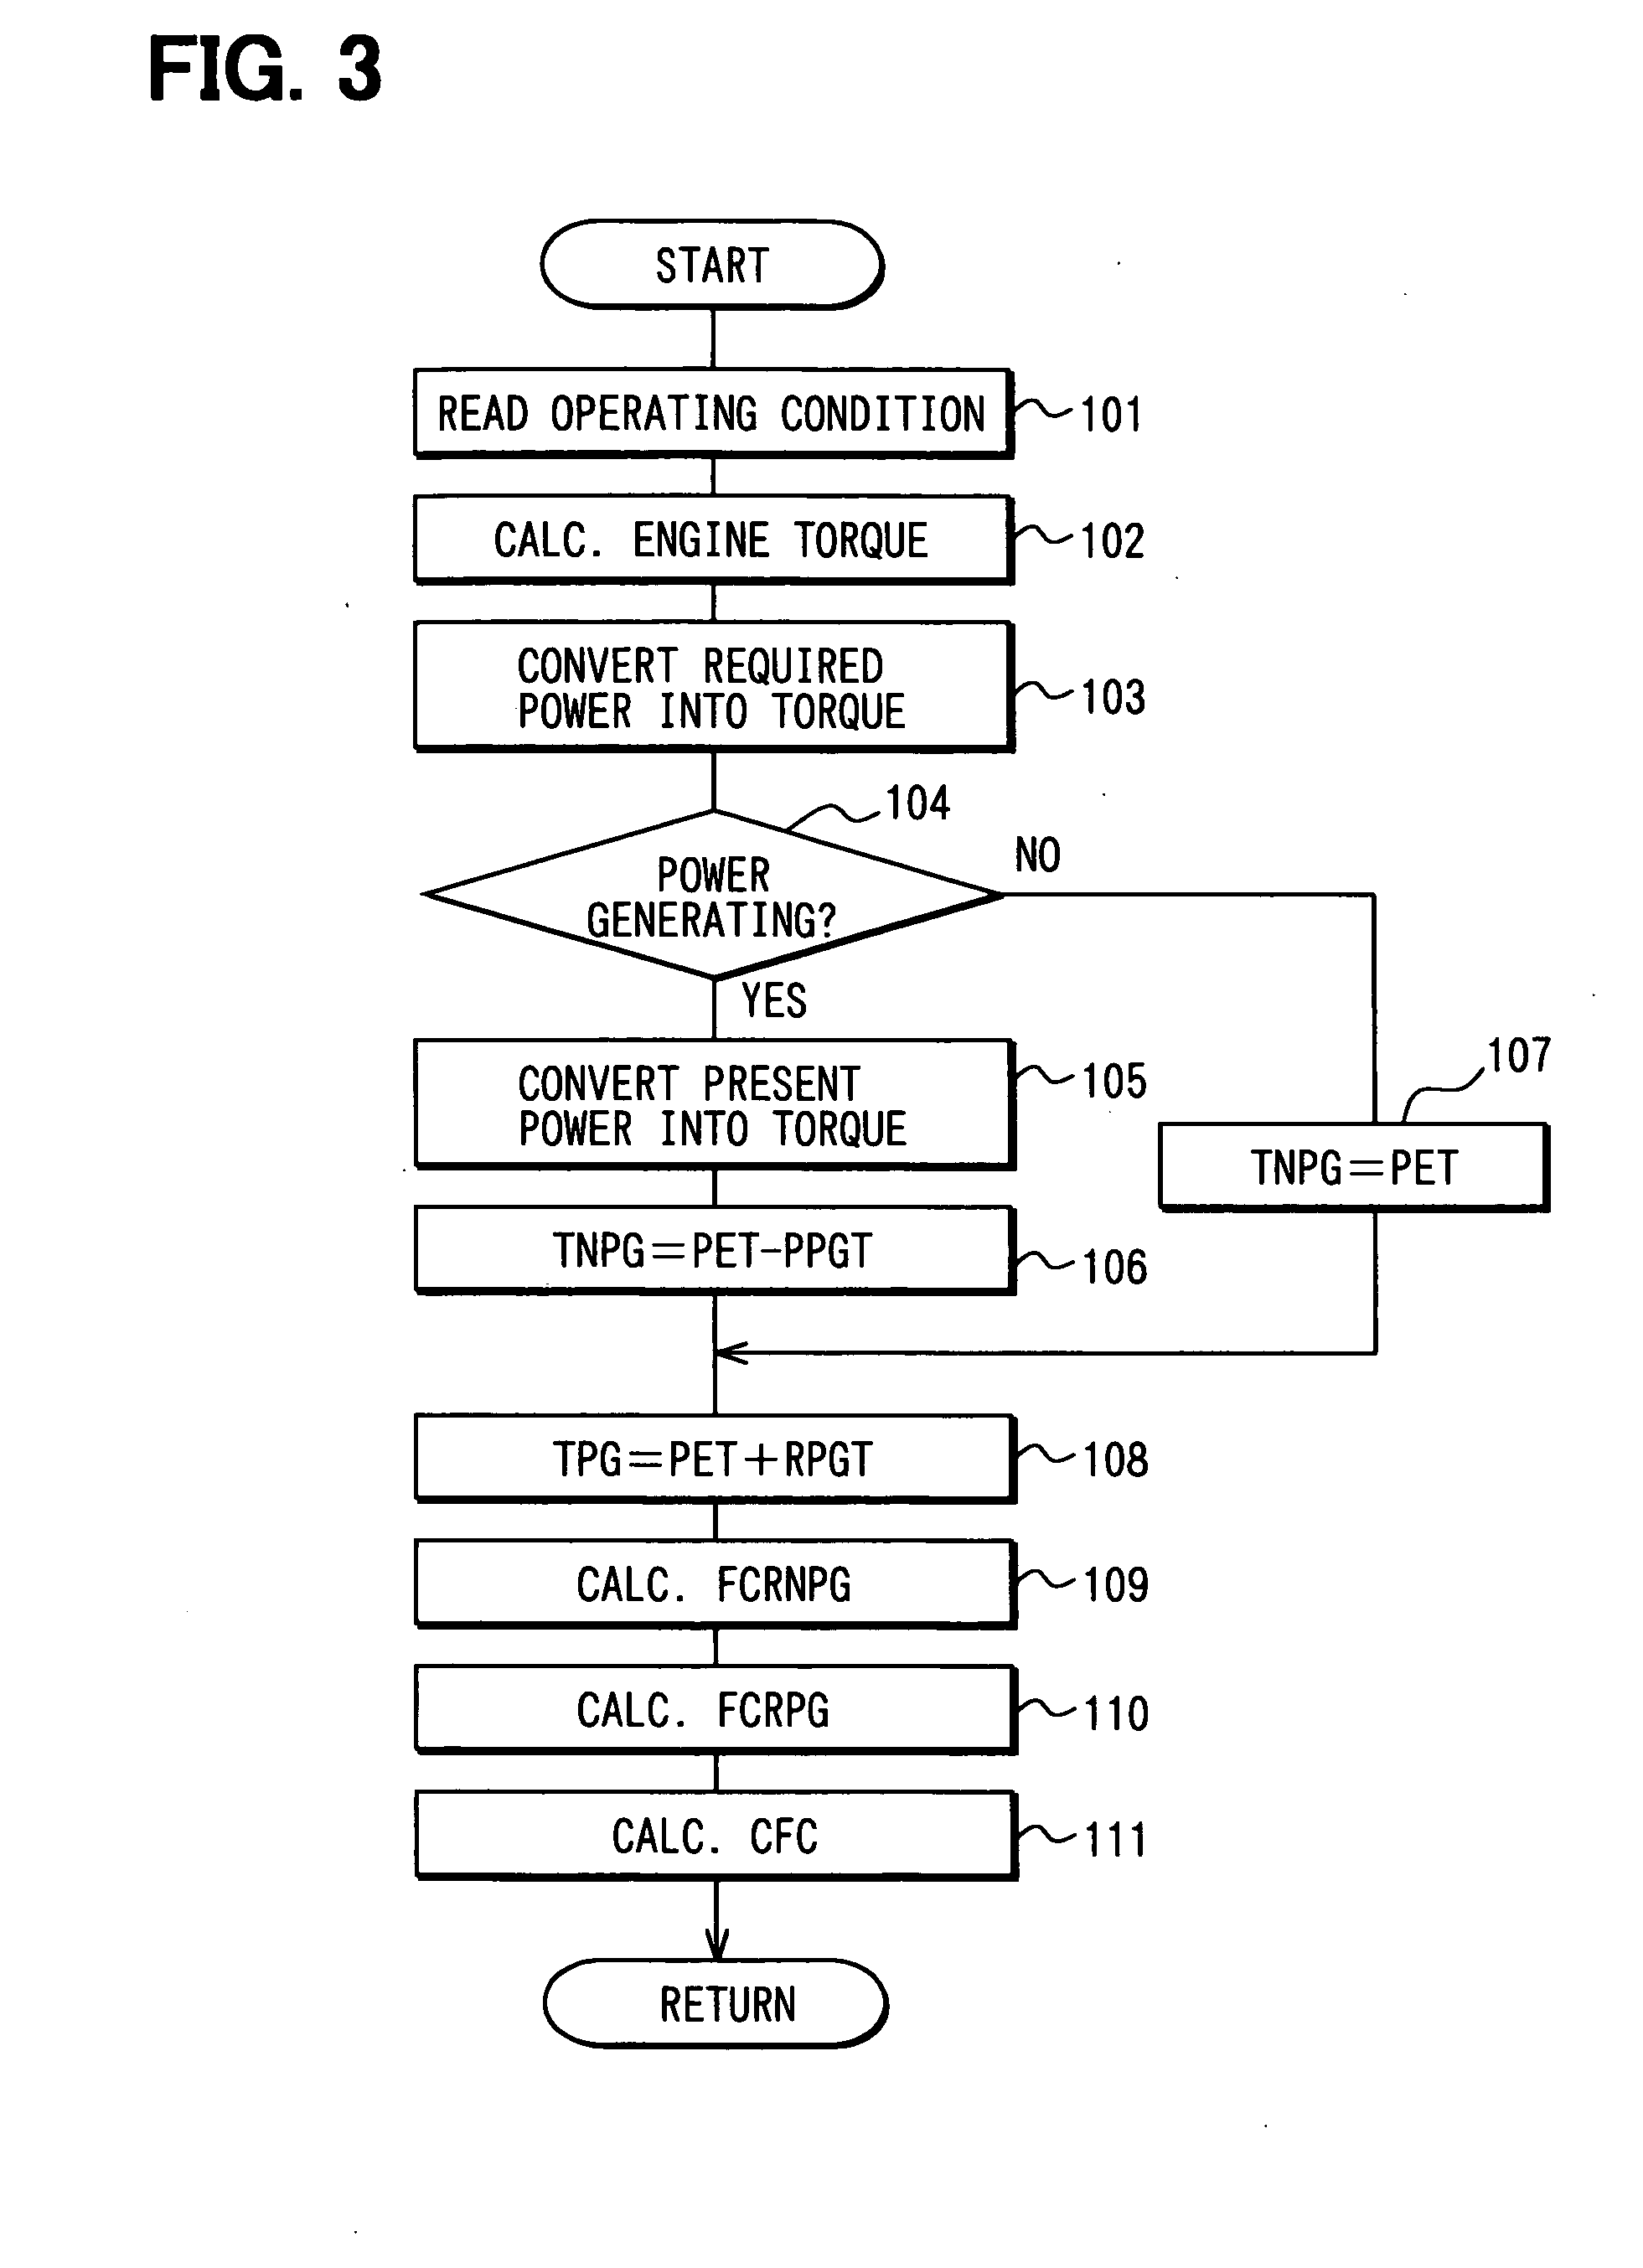 Power generation control apparatus for internal combustion engine